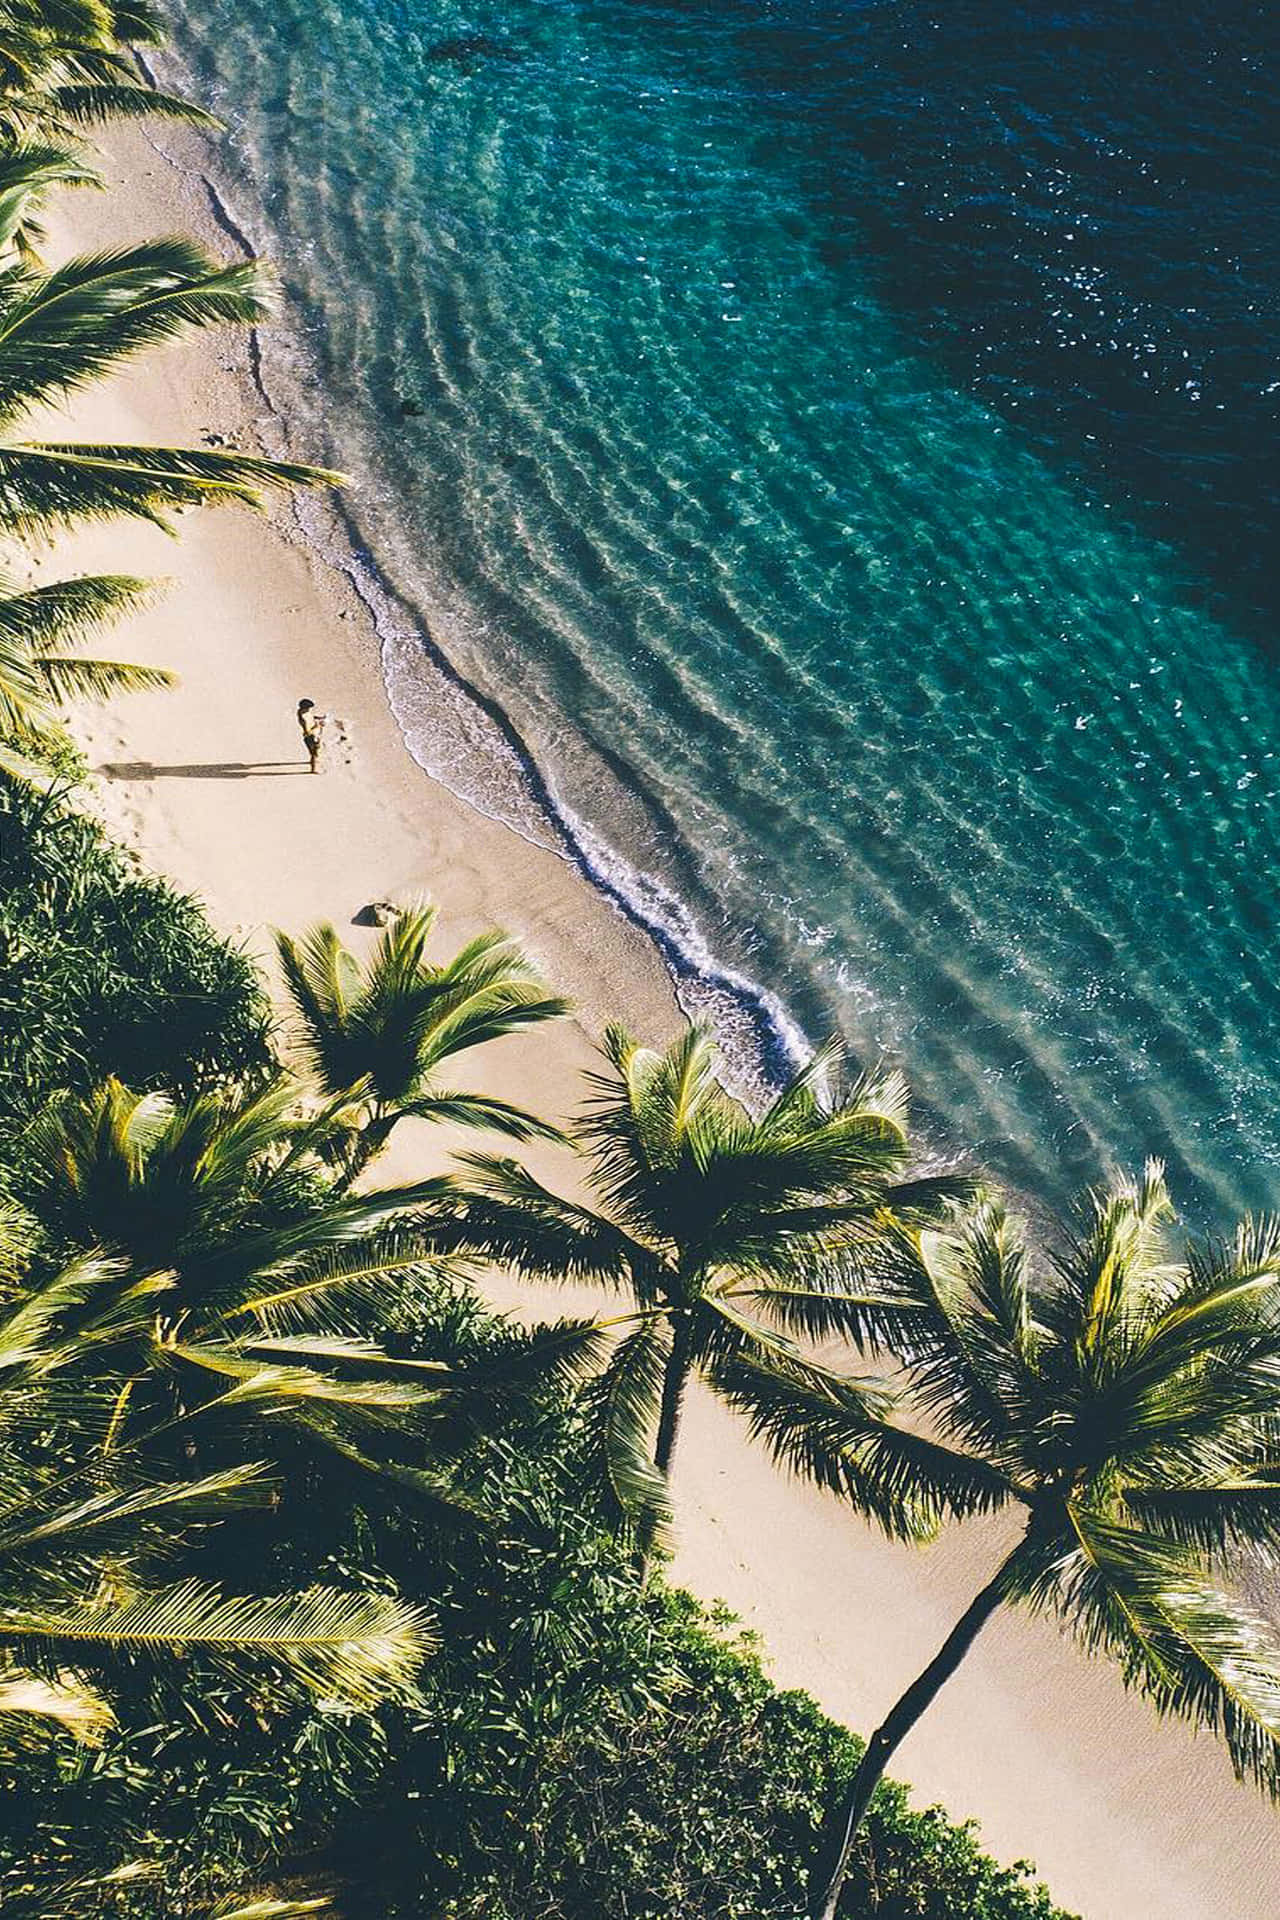 A beach with palm trees and water - Summer, Hawaii, tropical